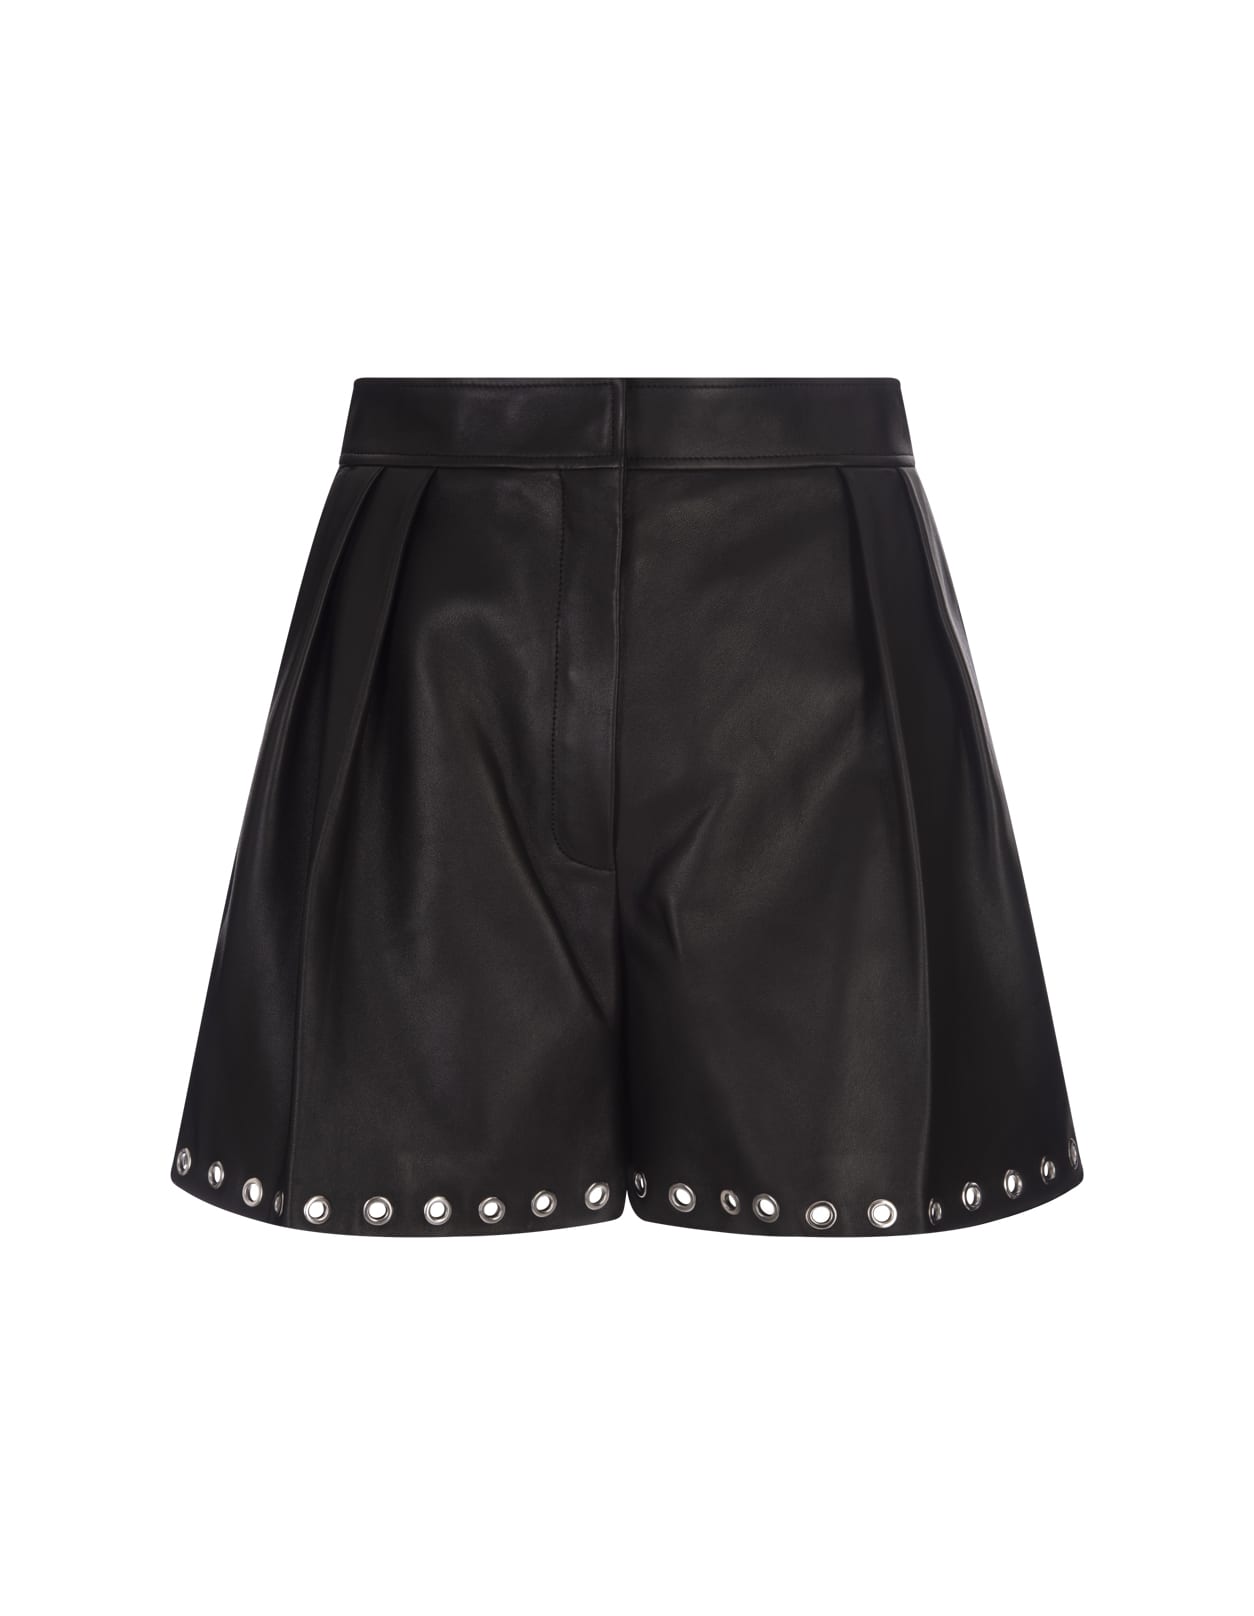 ALEXANDER MCQUEEN BLACK LEATHER SHORTS WITH METAL EYELETS